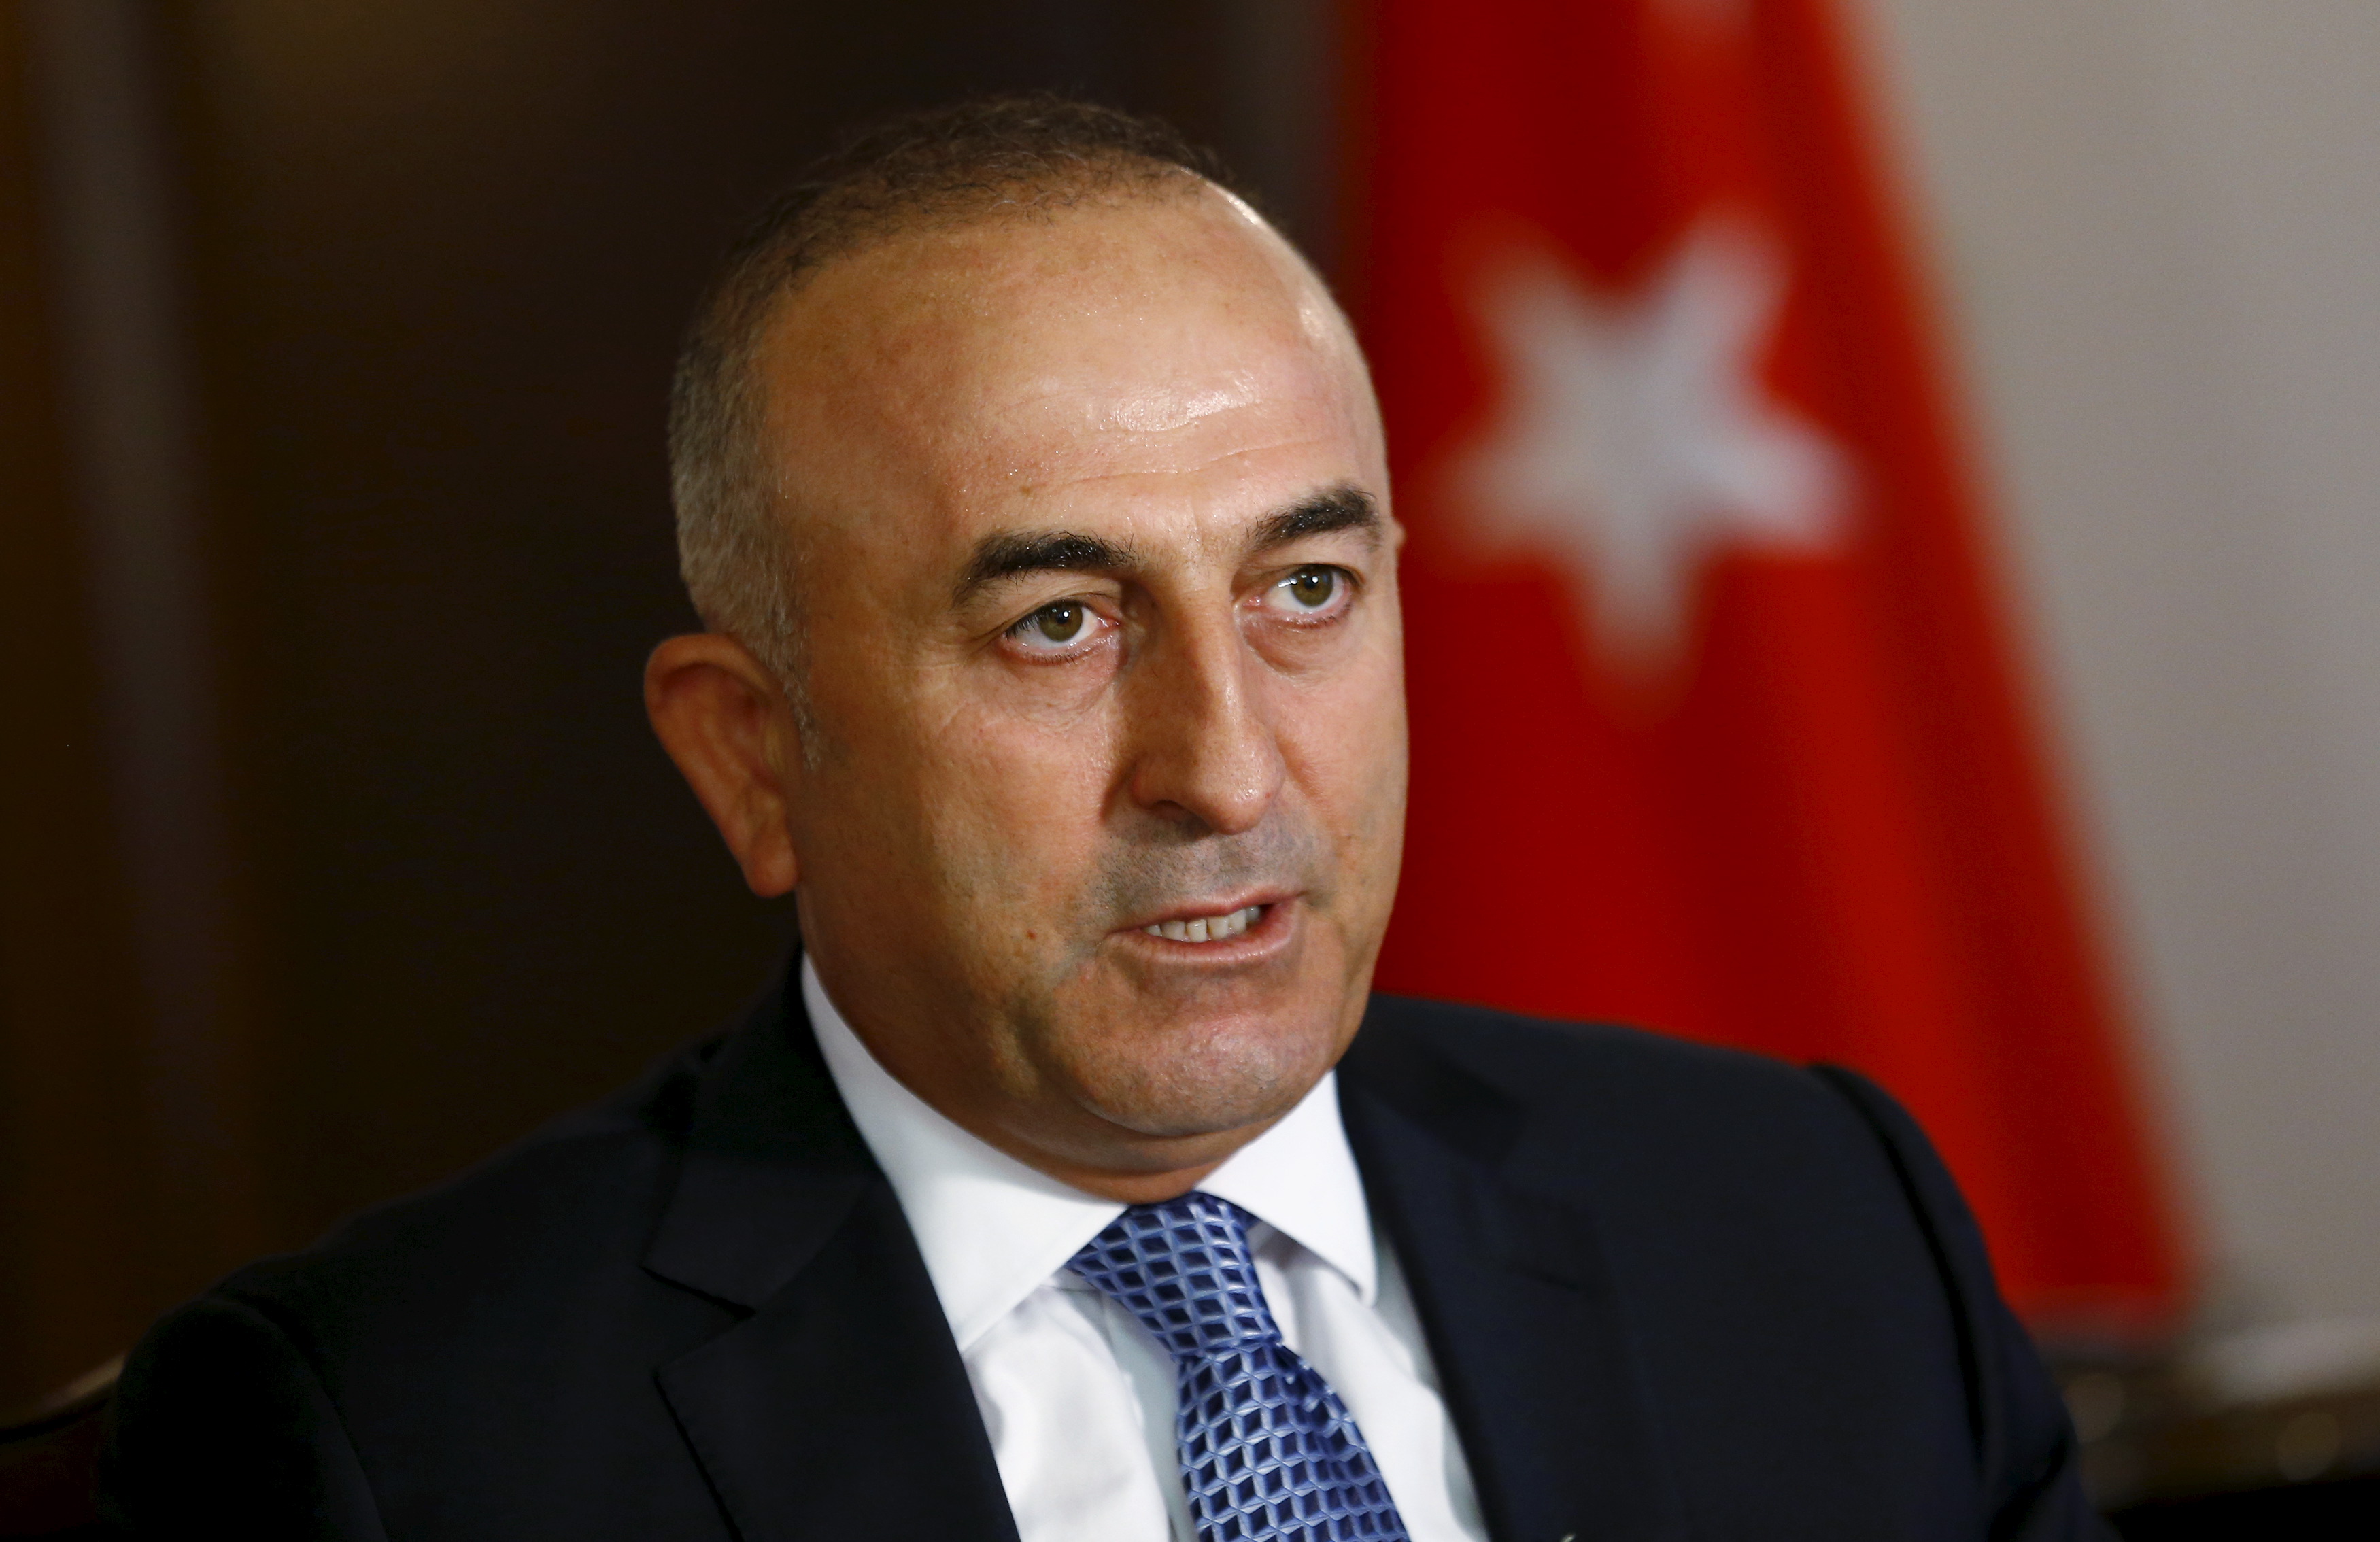 Turkey's Foreign Minister Mevlut Cavusoglu answers a question during an interview with Reuters in Ankara, Turkey, August 24, 2015.